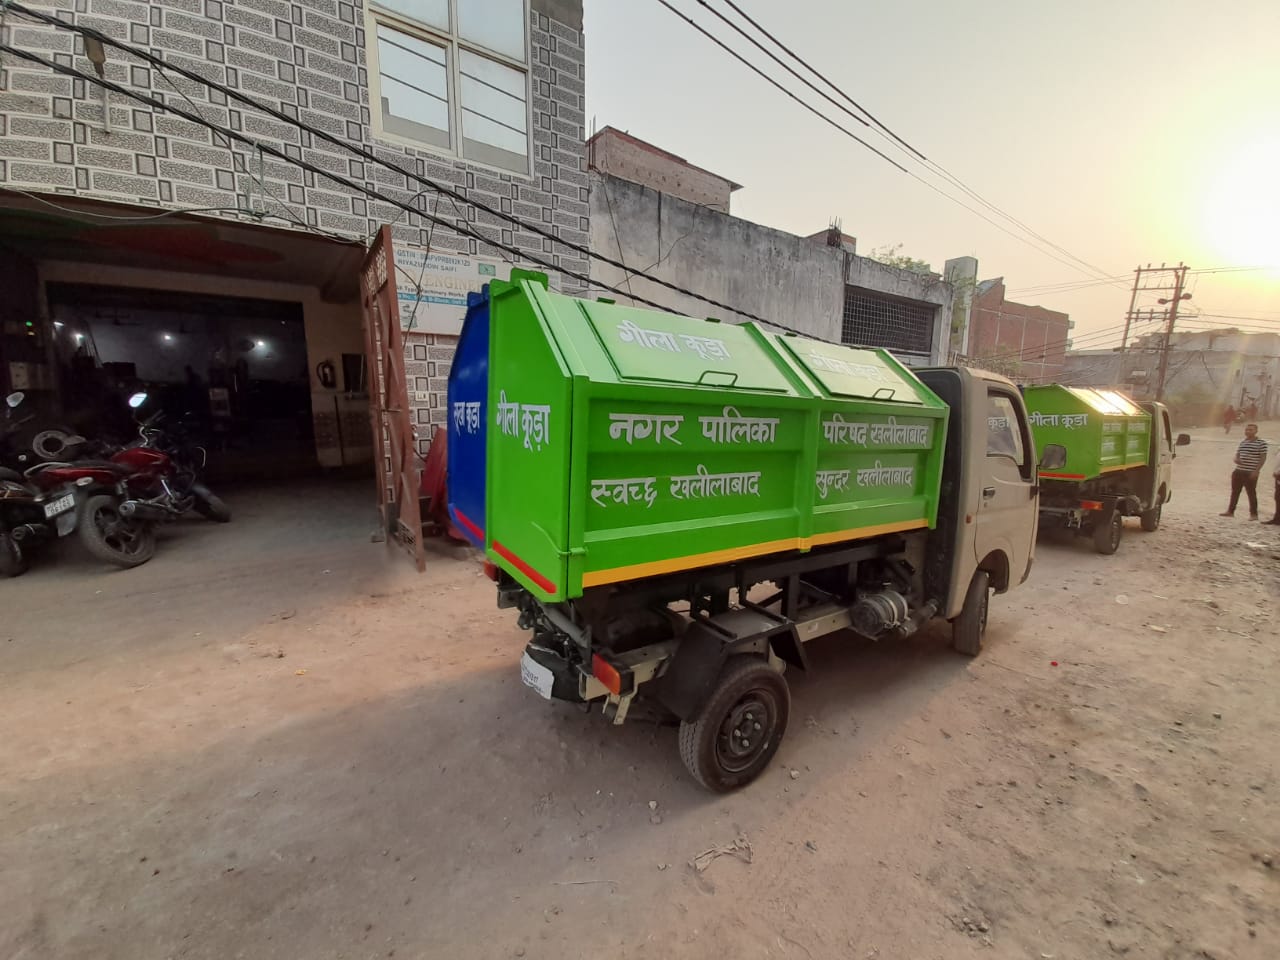 garbe-tipeer-or-auto-tipper-for-garbage-collection